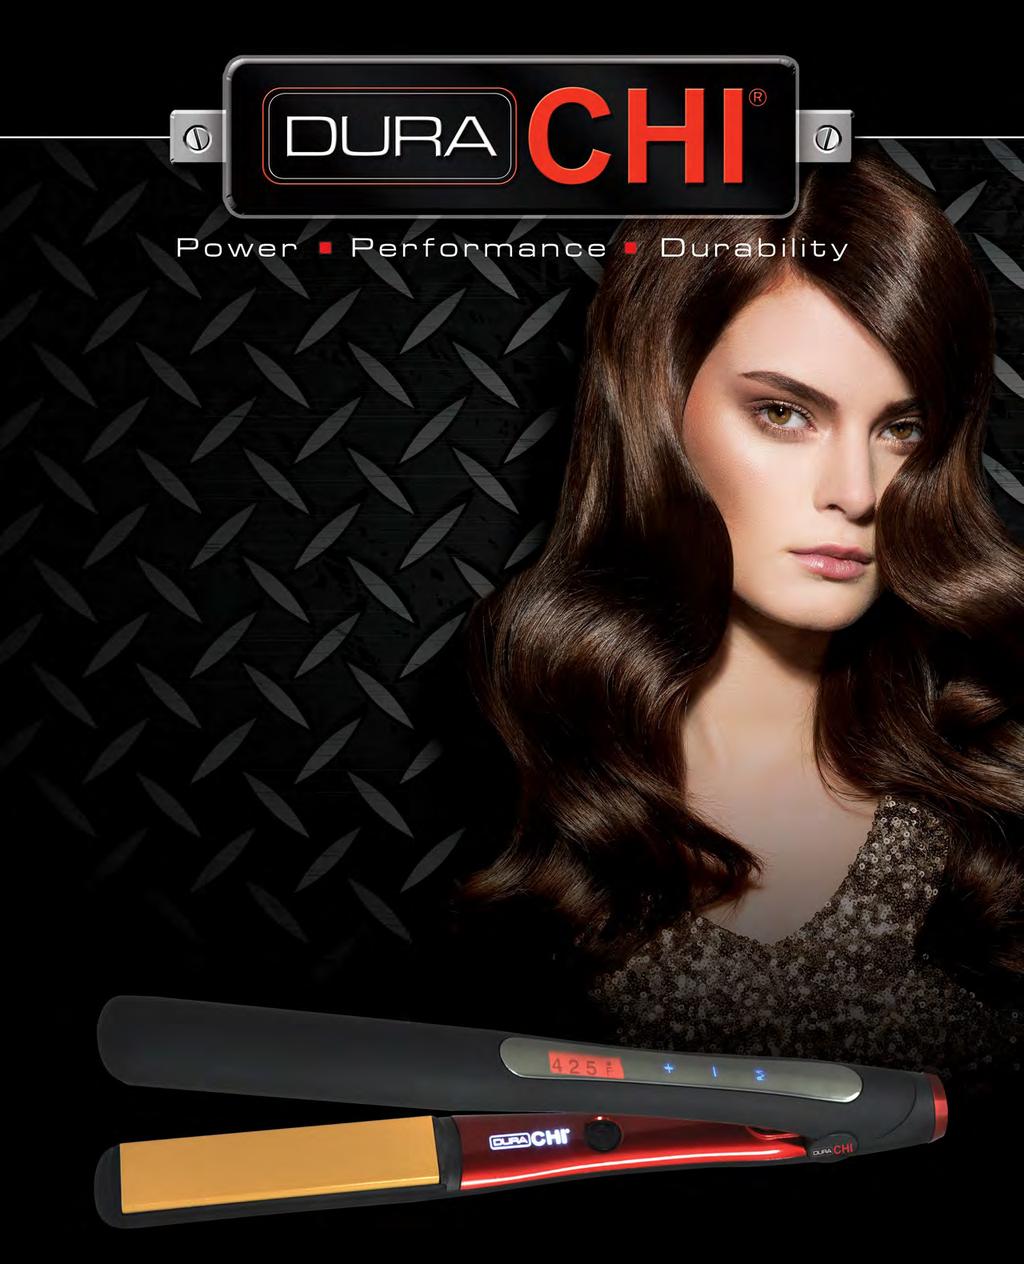 TOOLS The DURA CHI 1 Ceramic and titanium infused hairstyling Iron s sleek, ultramodern design features a convenient slim handle grip and extended plate length, expertly designed for stylists comfort